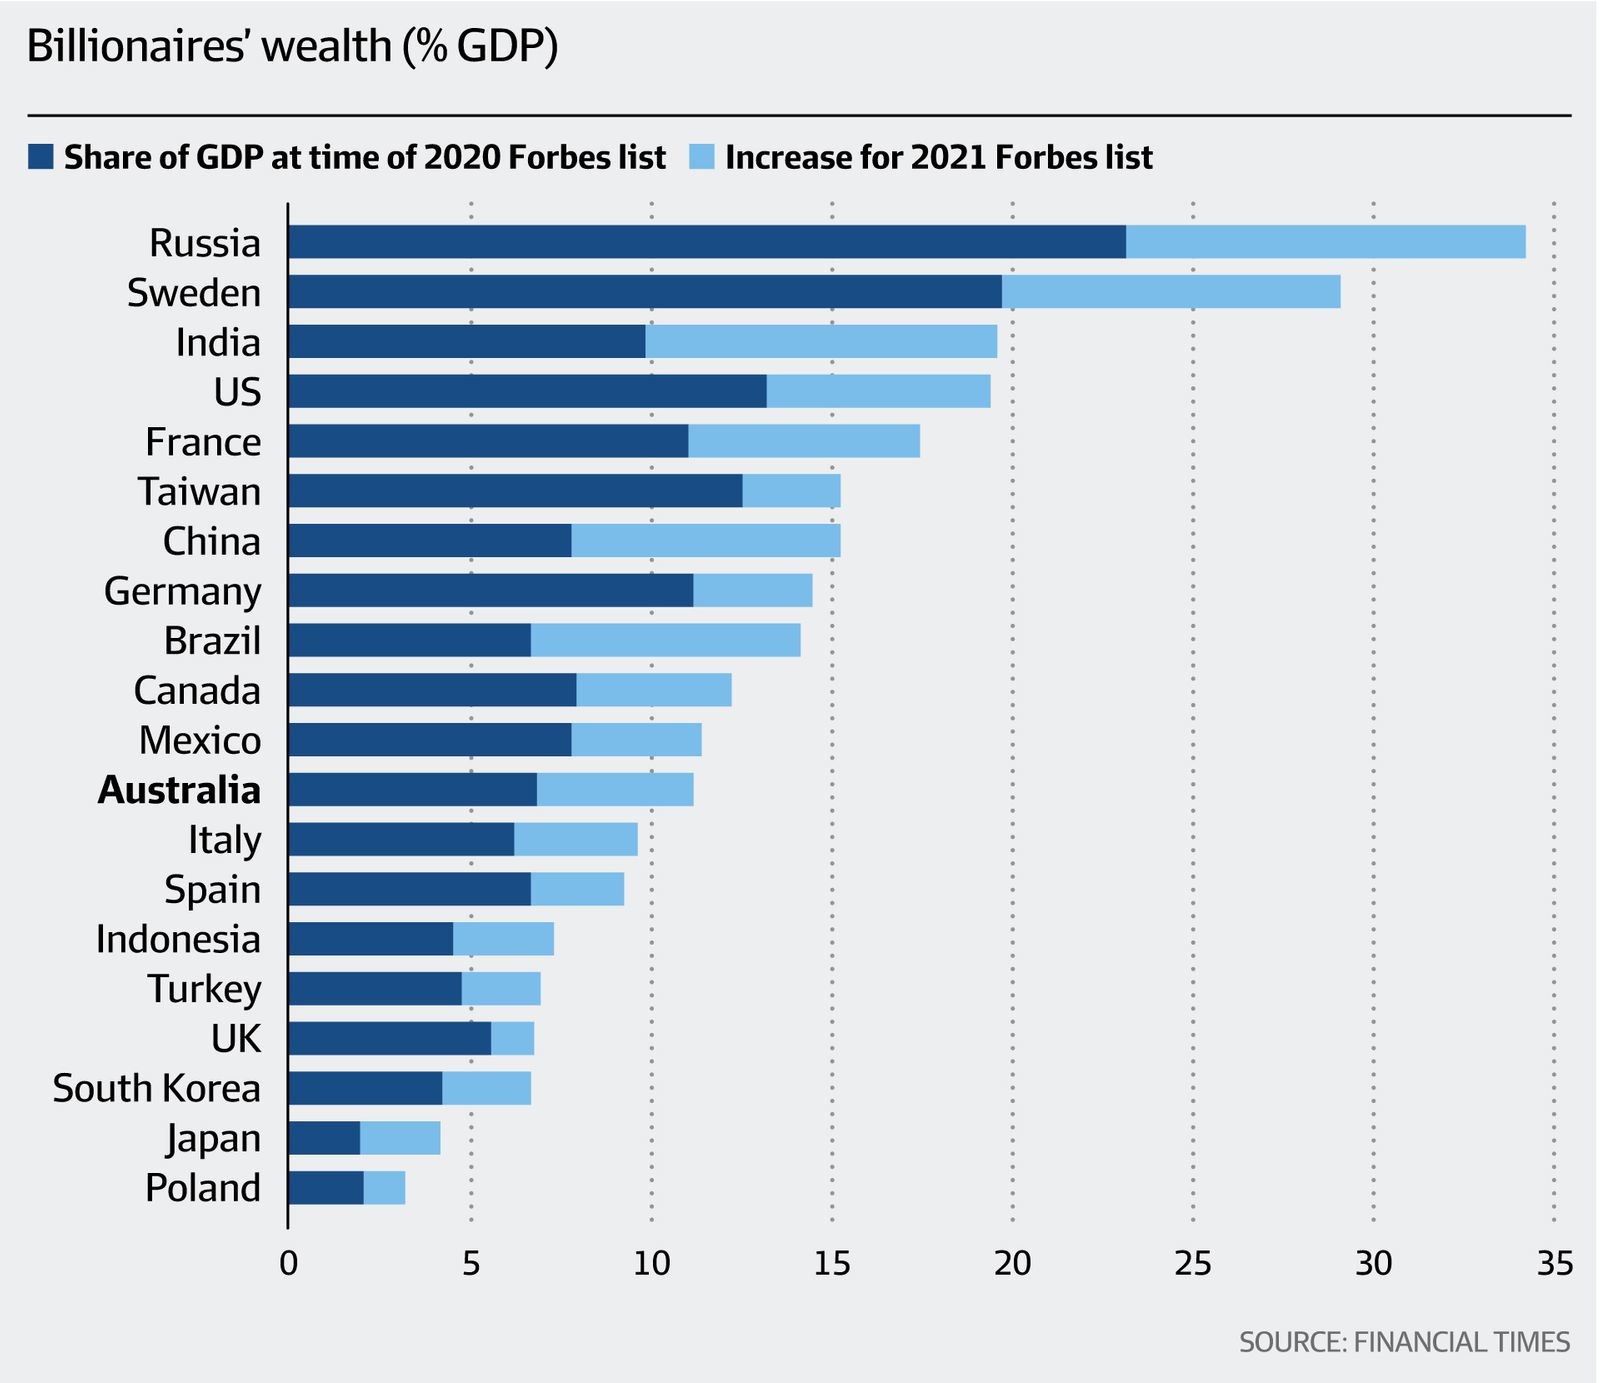 Fat Tail Investment Research - Billionaire's Wealth GDP